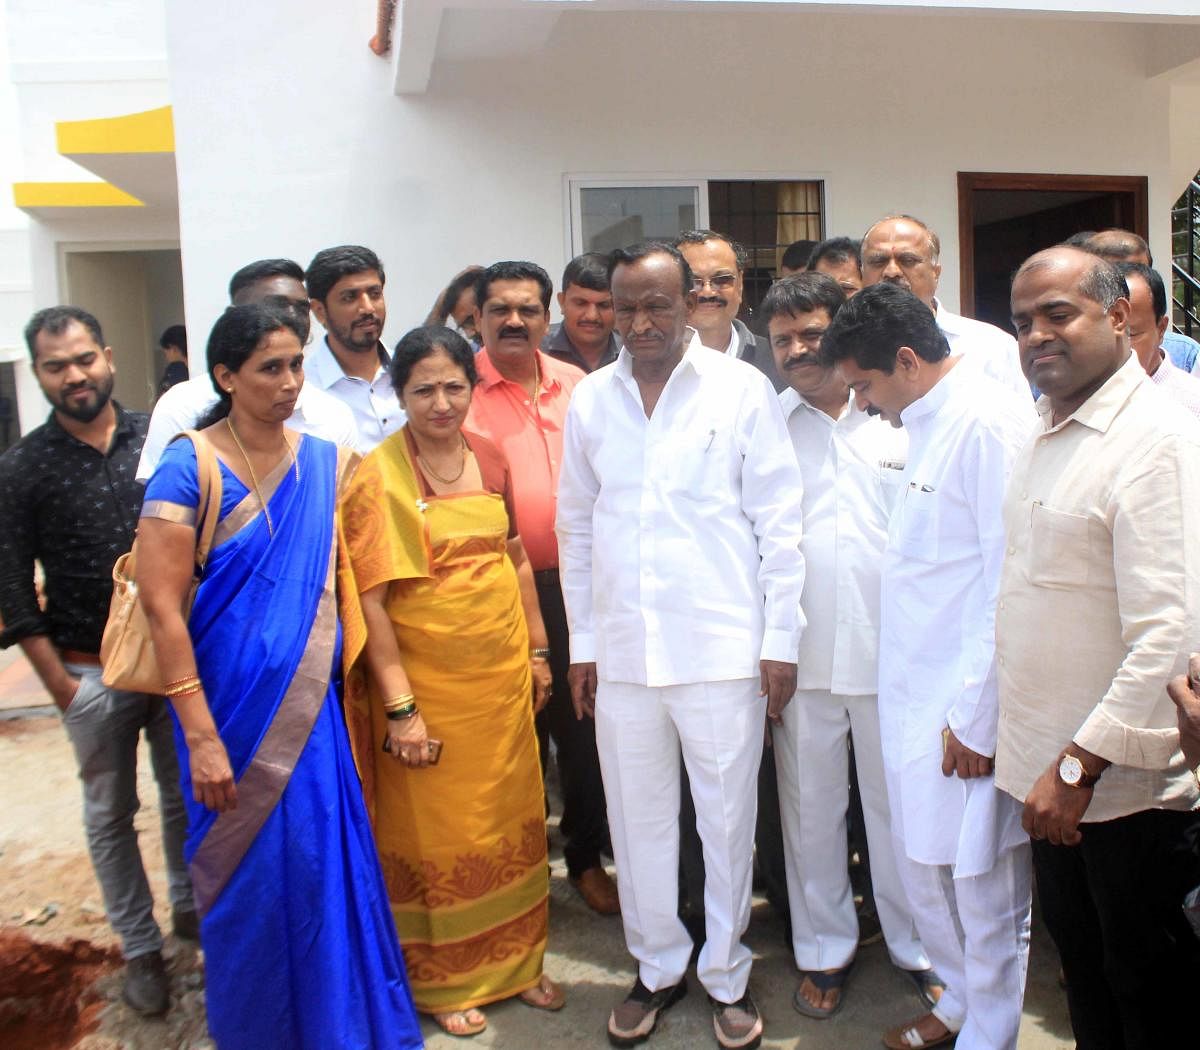 Housing Minister M T B Nagaraj inspects the houses constructed for calamity victims at Jambooru in Somwarpet.